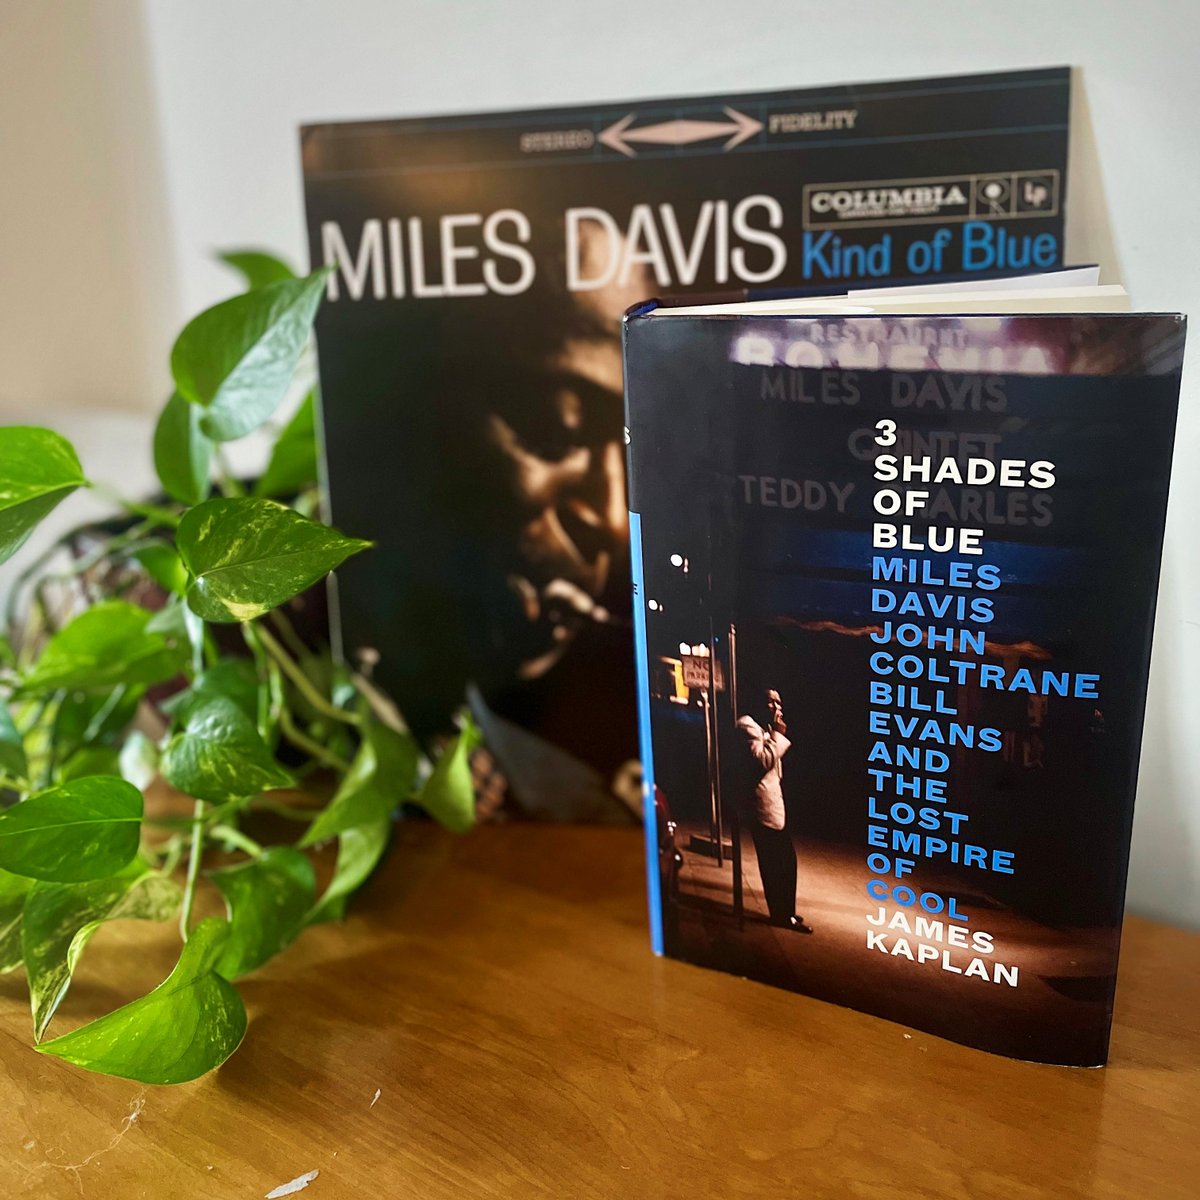 🎺3 Shades of Blue by James Kaplan @jckaplan is on sale today! 🎺⁠ ⁠ “Between 1955 and 1965 jazz reached its peak. . . . Kaplan has written the definitive book on how that decade came to be . . . vital. ' —London Sunday Times Start reading: bit.ly/4a2Y9C9